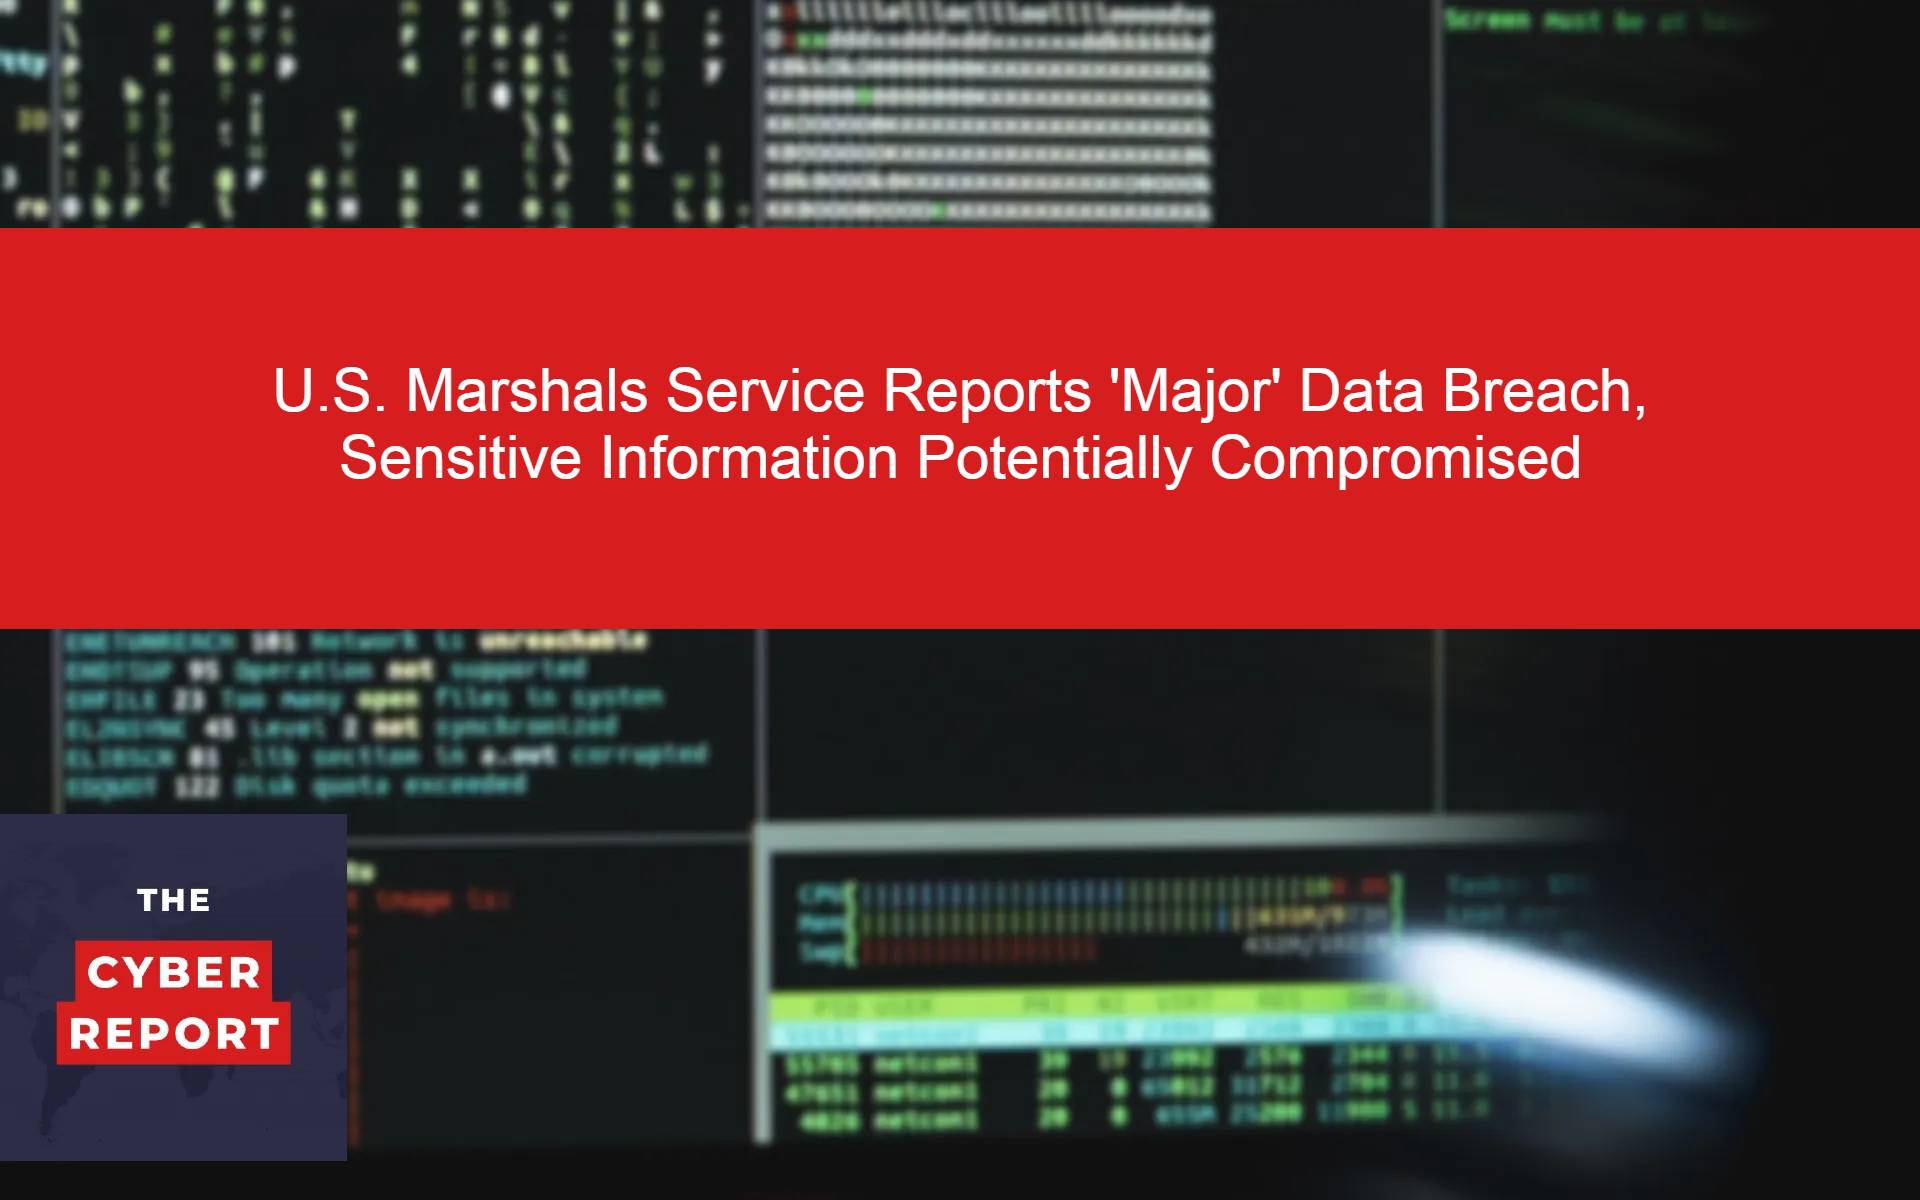 U.S. Marshals Service Reports 'Major' Data Breach, Sensitive Information Potentially Compromised